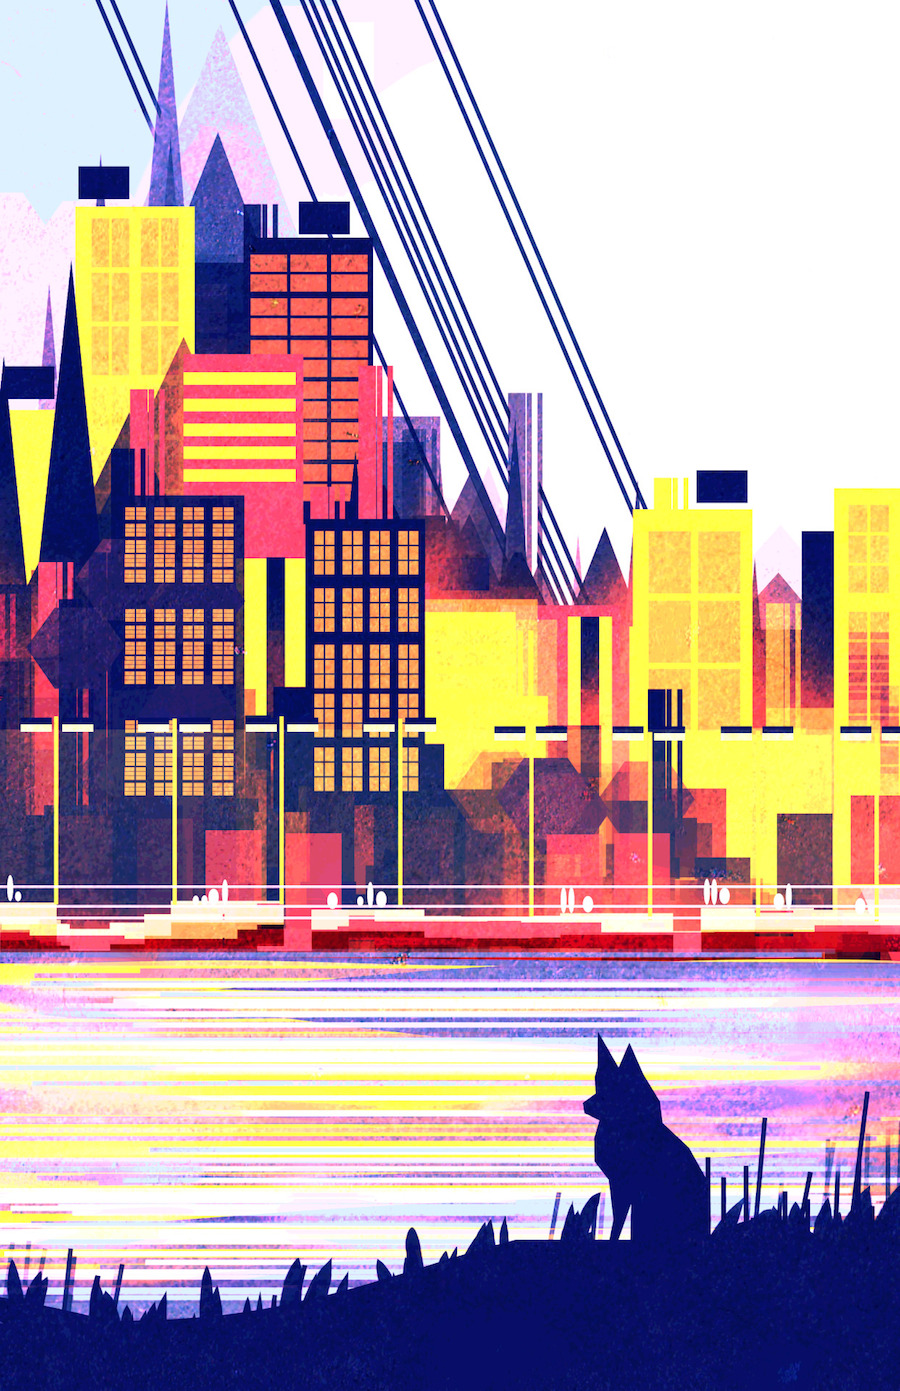 Geometric and Colorful 2D Illustrations of Cities-11